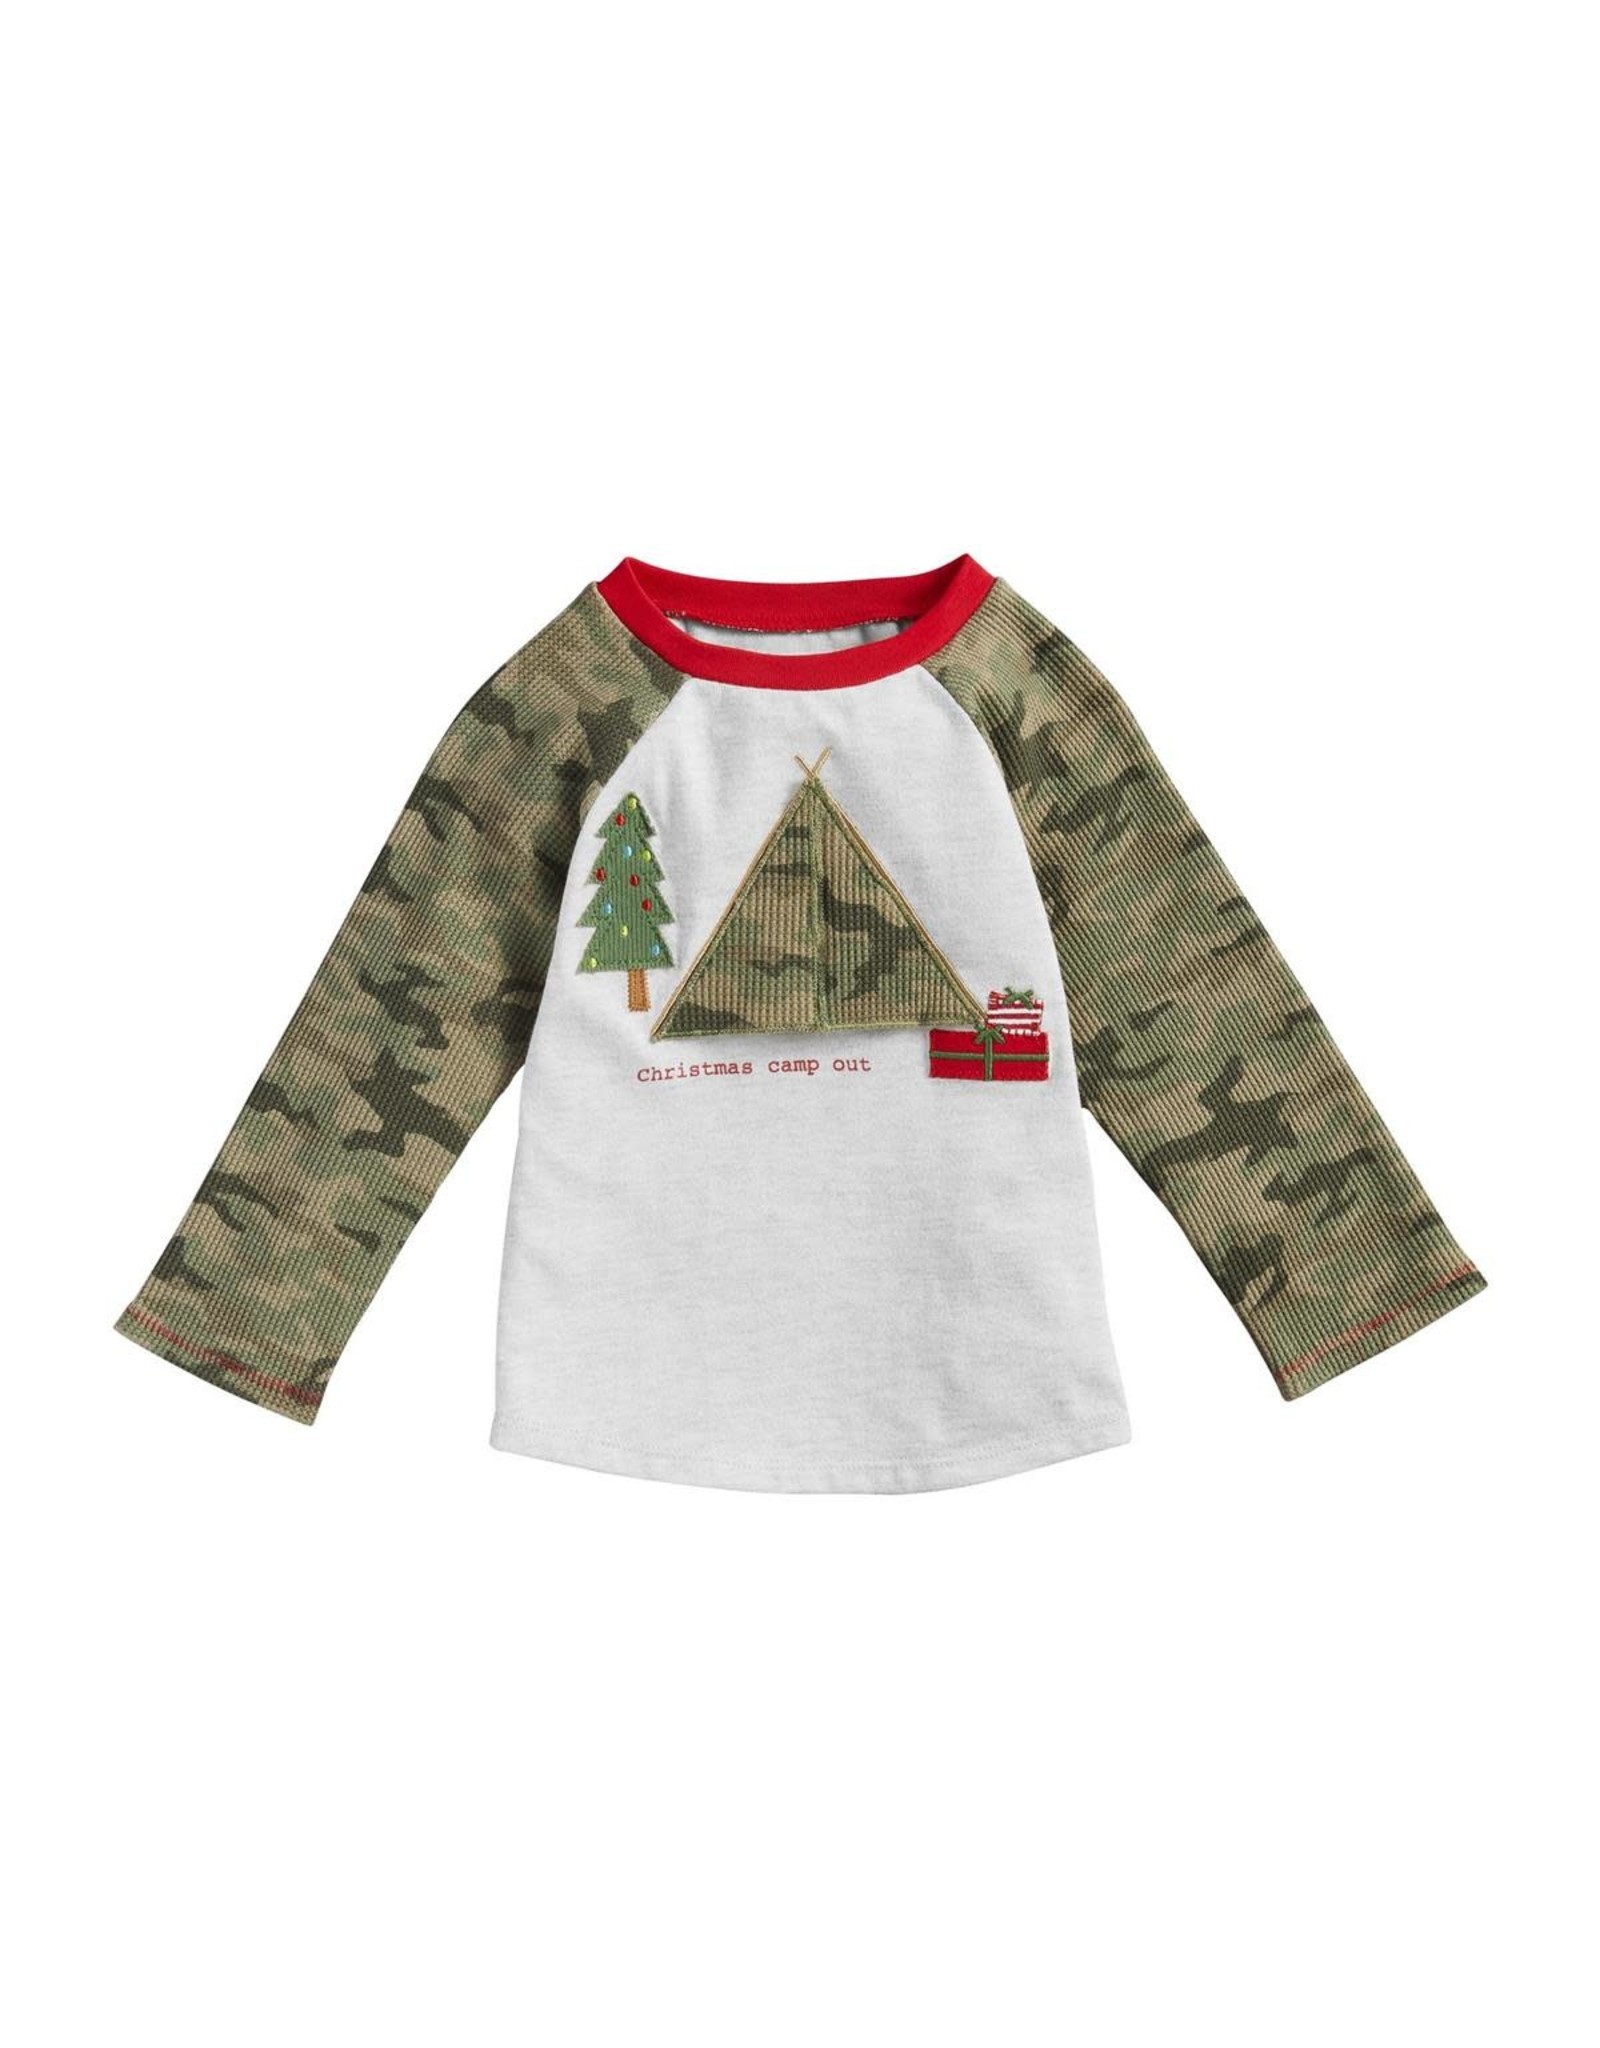 Mud Pie Kids Gifts Christmas Tee Shirt Camouflage Tent - Large 4T-5T